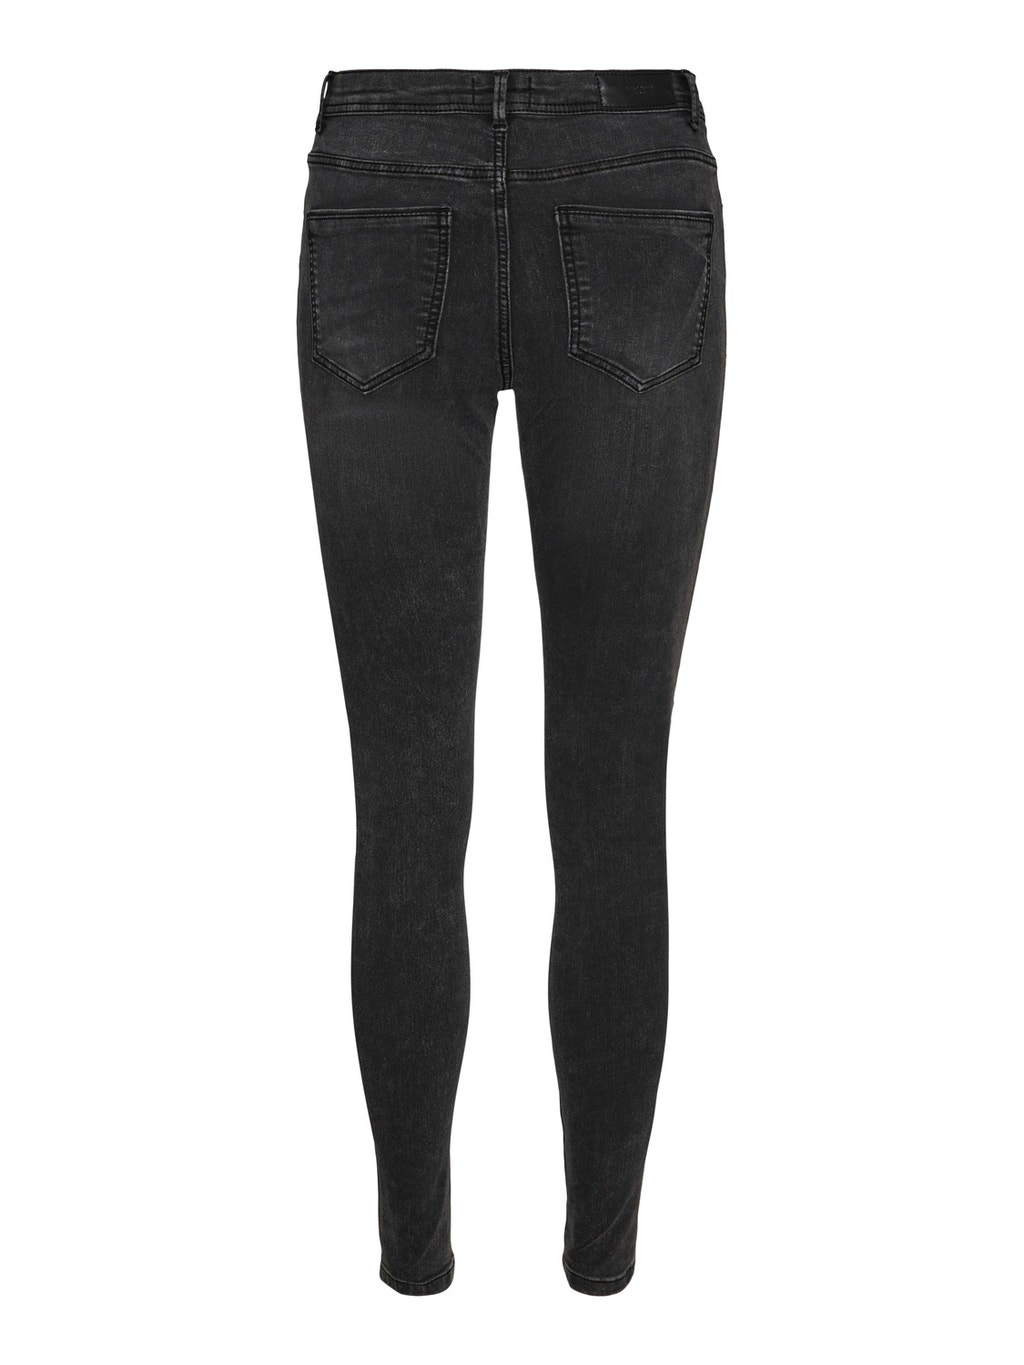 Skinny Fit Jeans with 20 discount! Vero Moda®